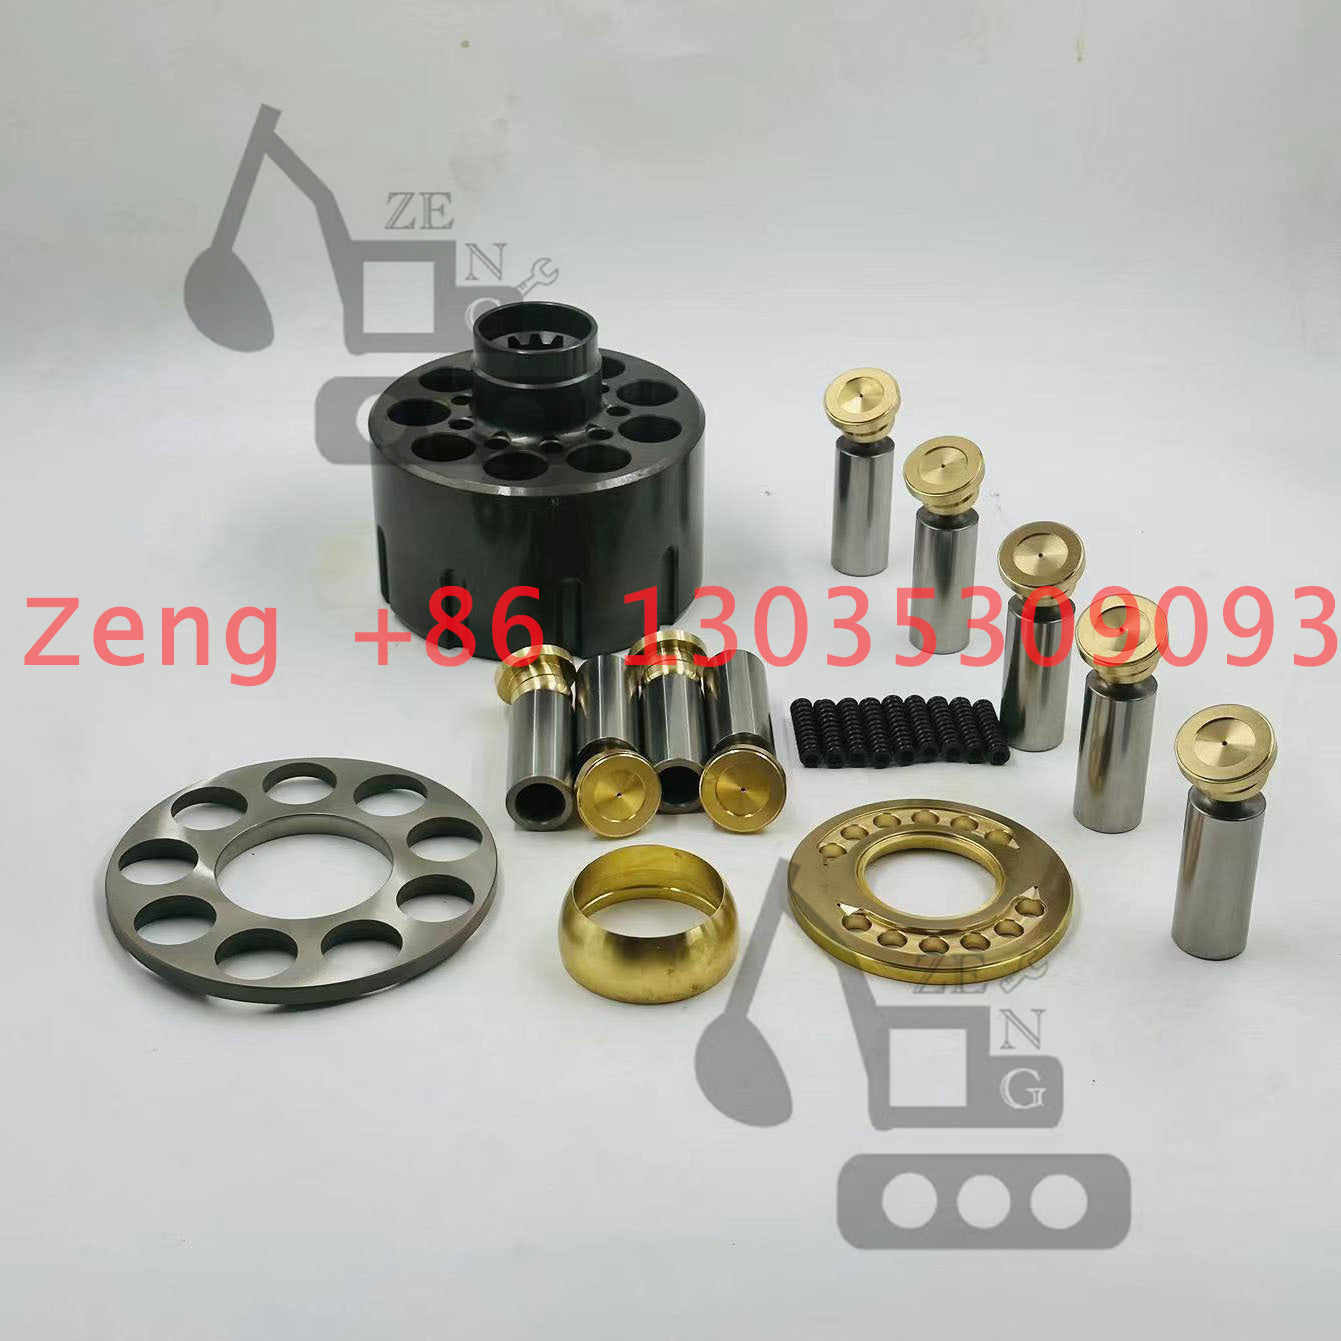 Caterpillar MCB172 hydraulic travel motor rotory group and spare parts used for Kobelco SK200-6，Komatsu PC200-7，Caterpillar CAT200B CAT320B CAT320C CAT324 CAT325B  excavator